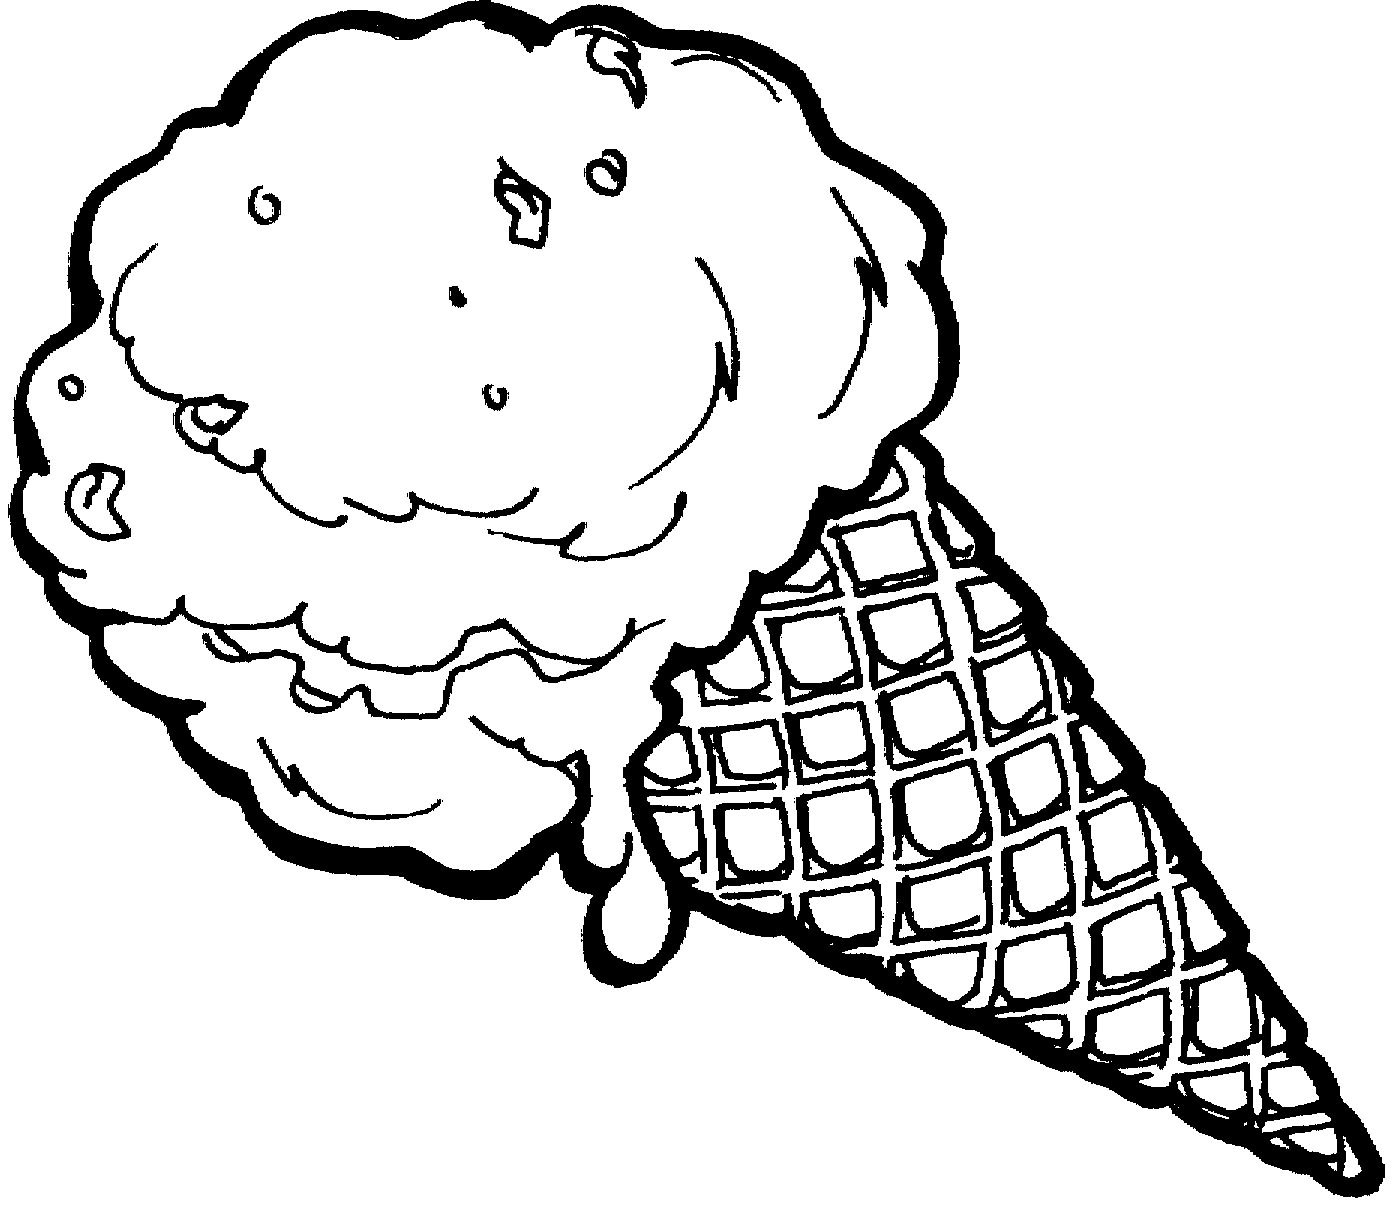 Free Ice Cream Cone Coloring Page, Download Free Clip Art